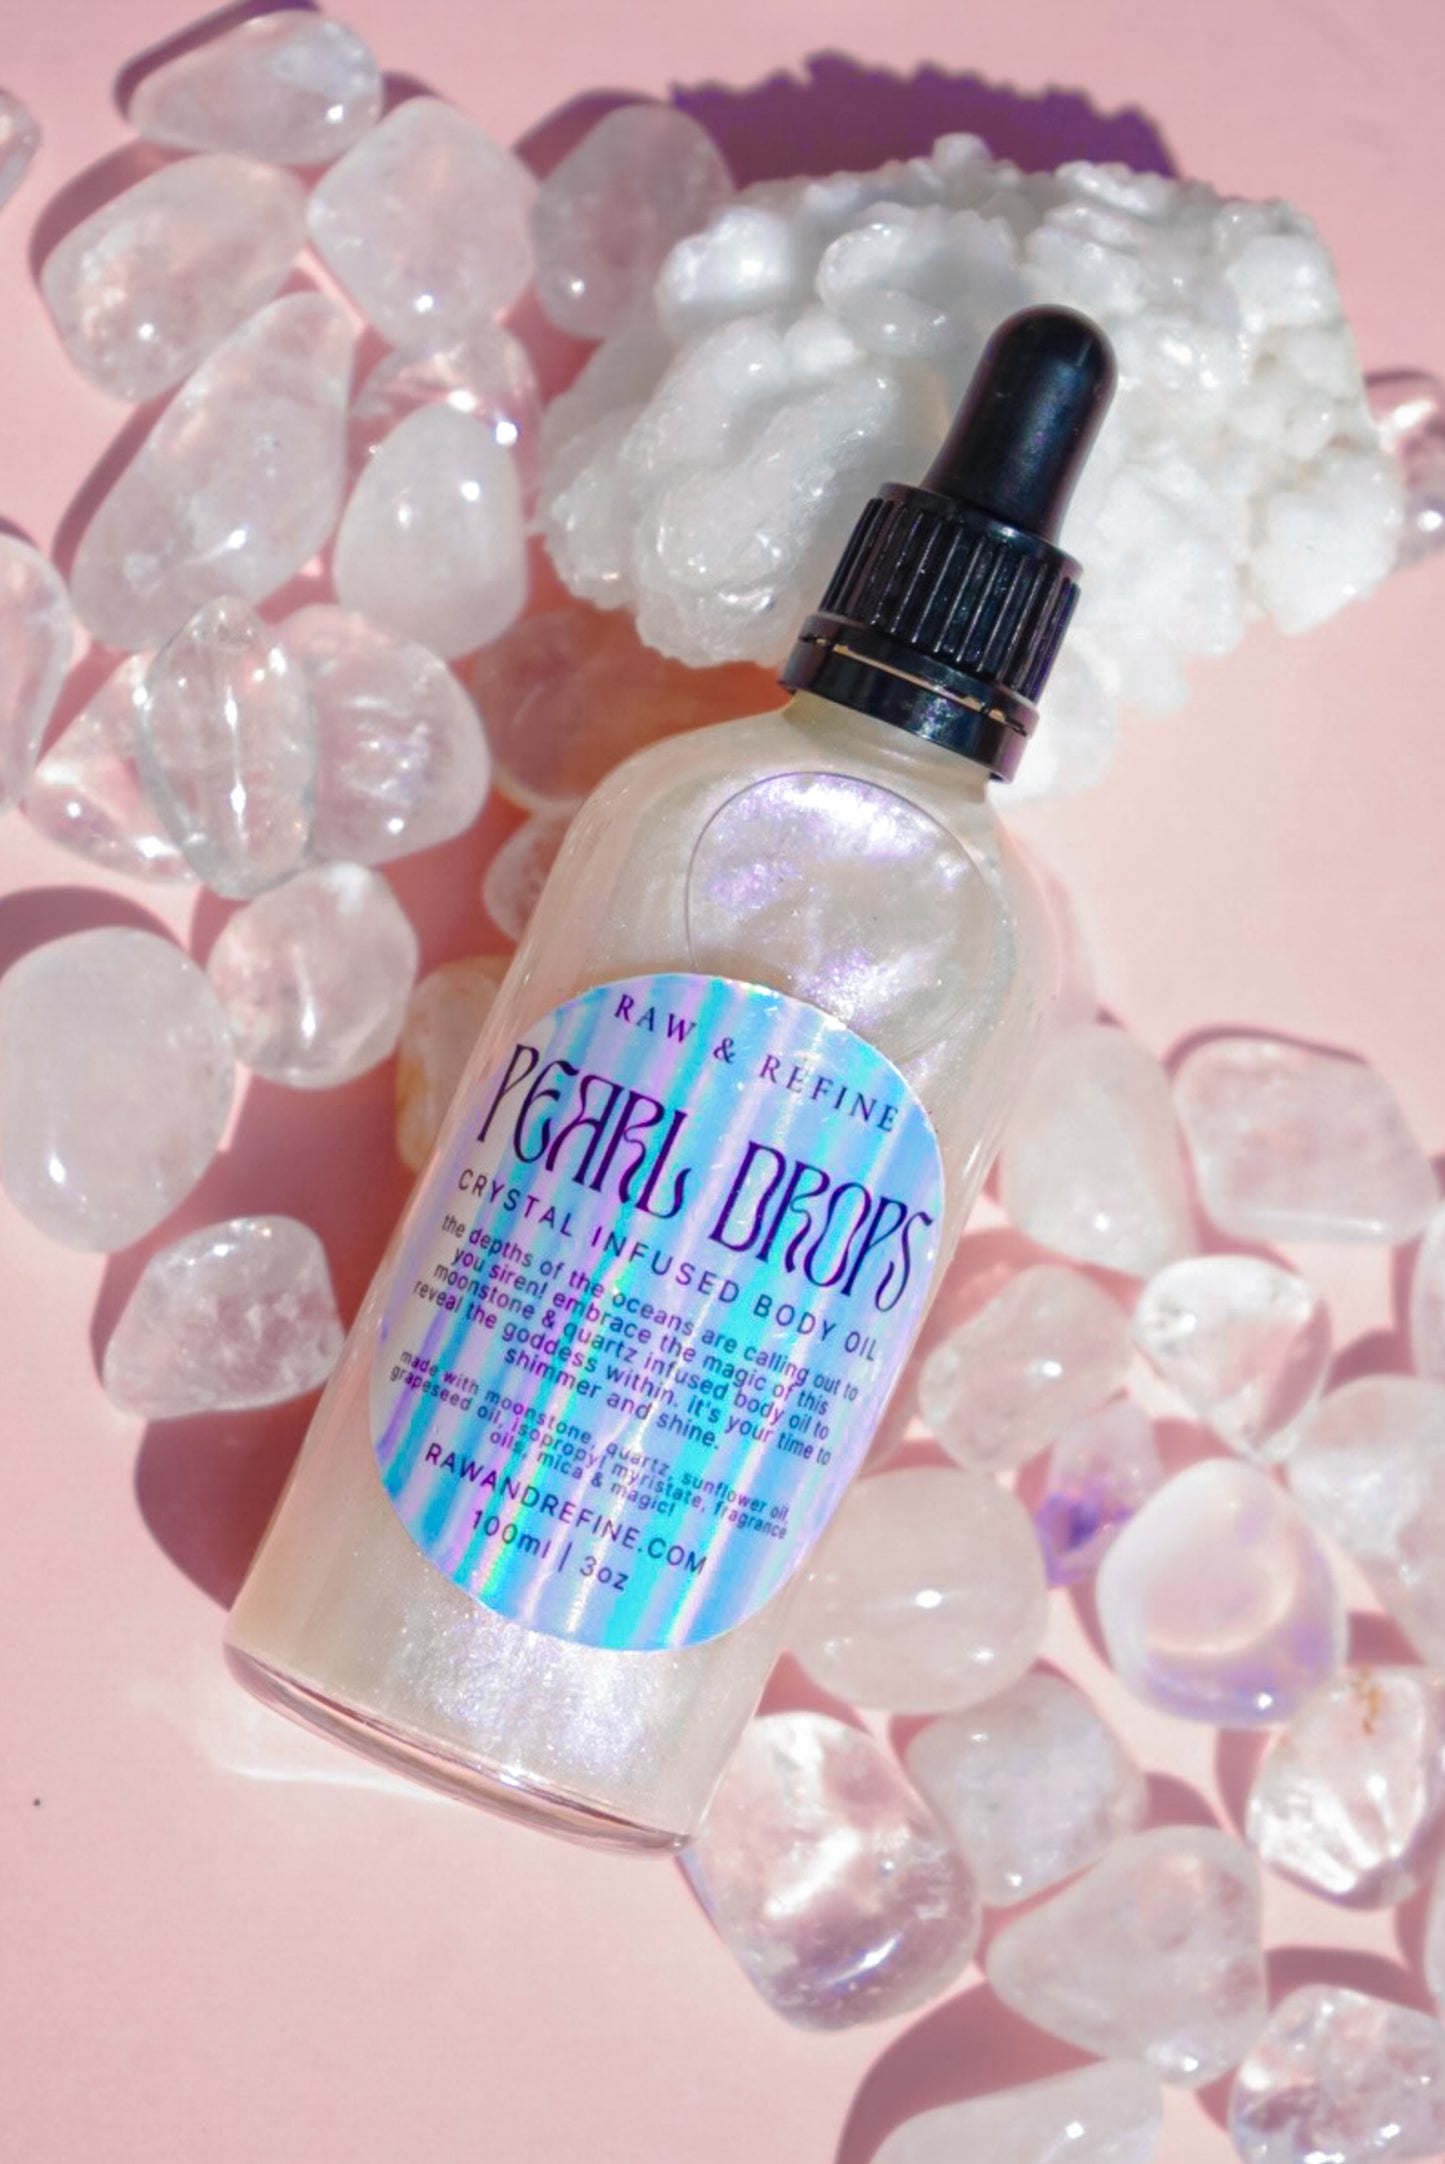 Pearl Drops - 3oz Crystal Infused Body Oil